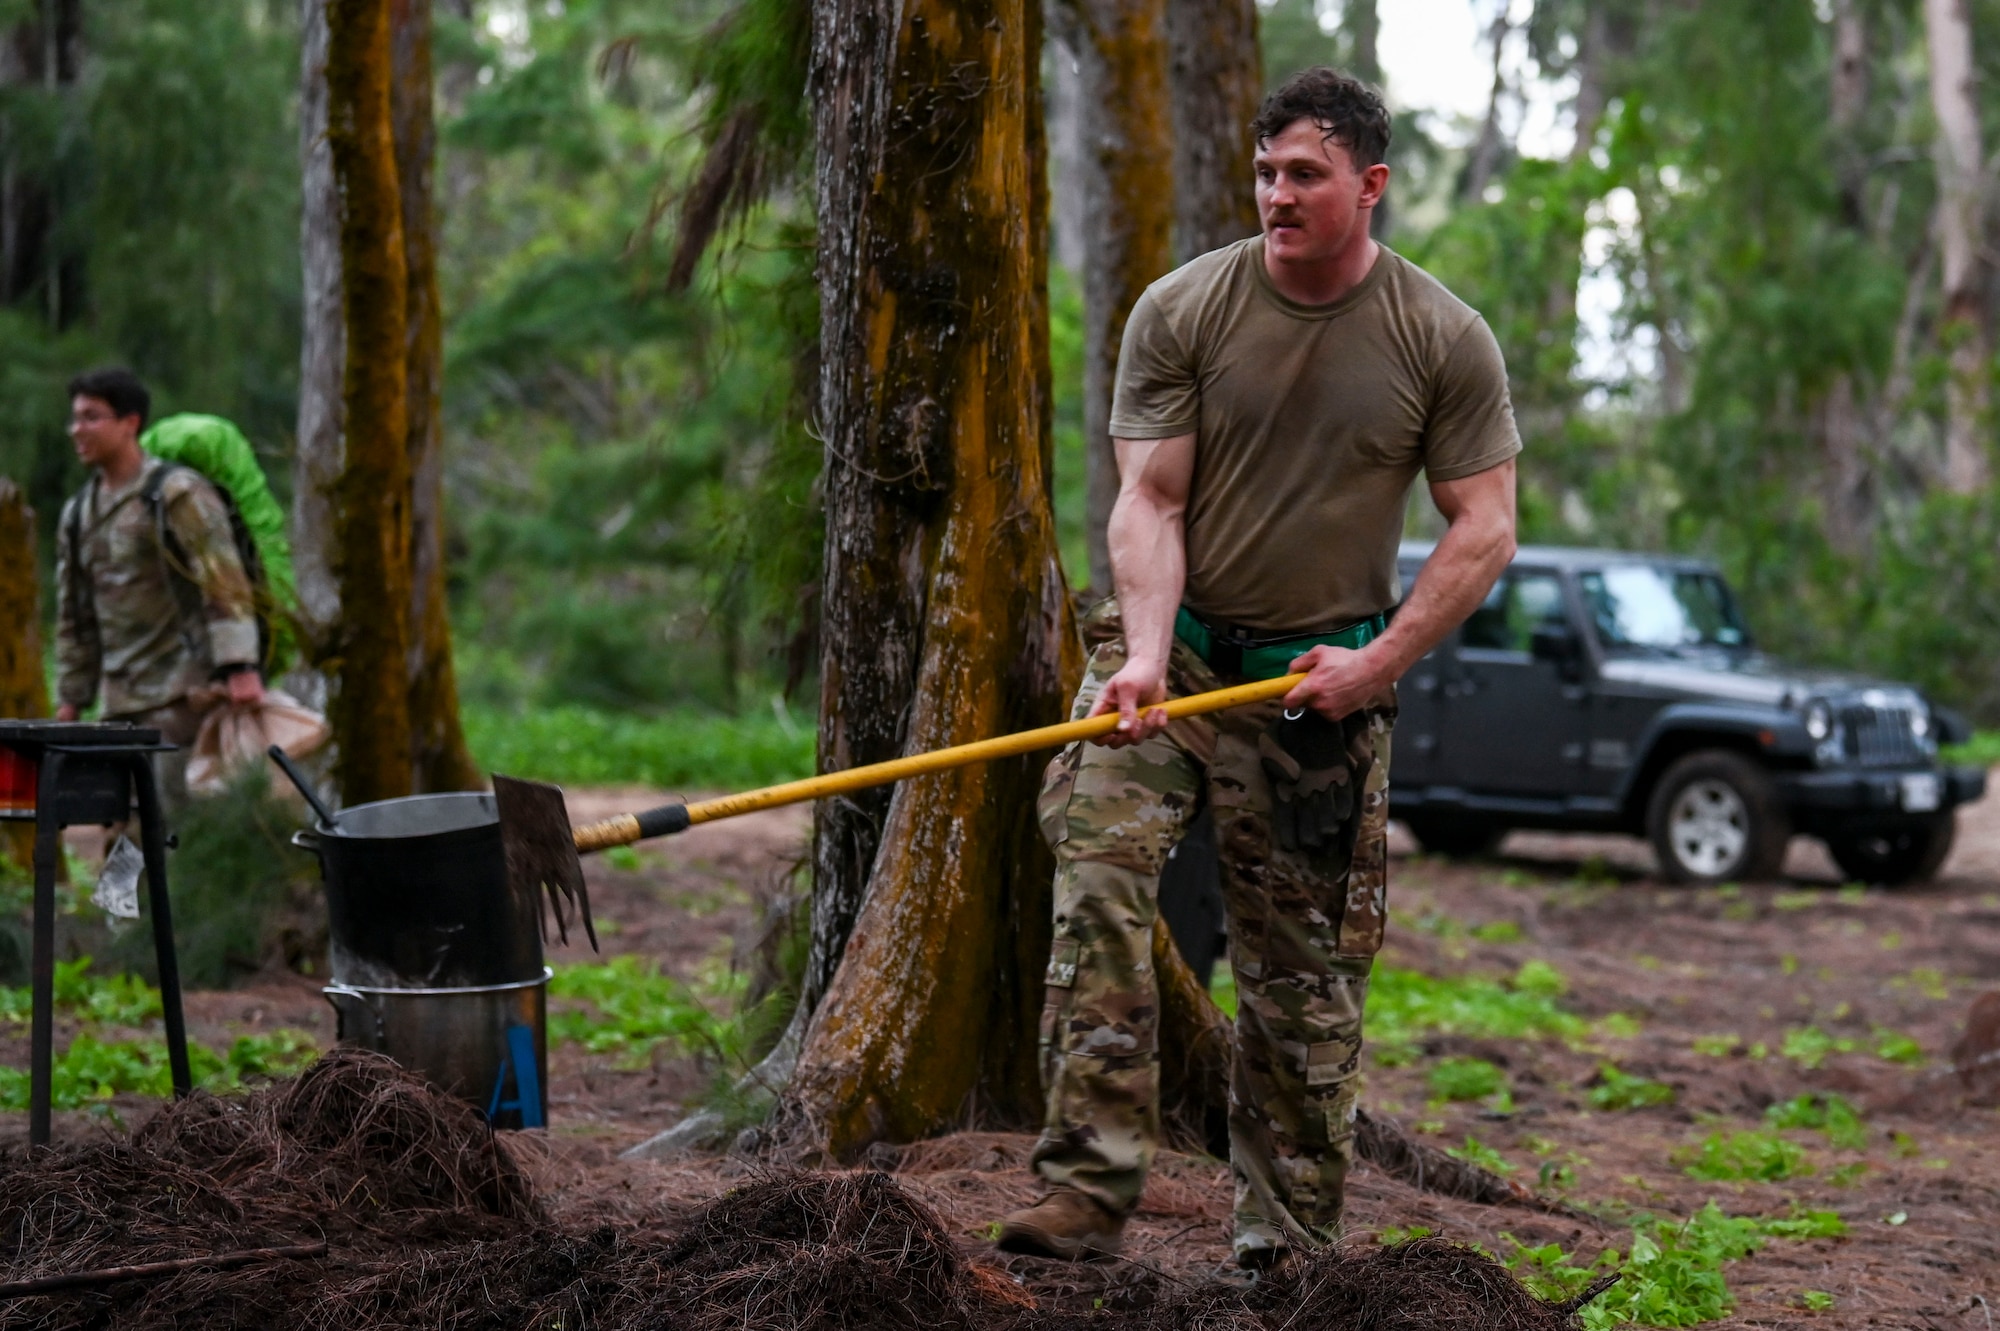 U.S. Air Force Staff Sgt. Daniel Hukill, 92nd Aircraft Maintenance Squadron flying crew chief, plows the ground in preparation to build a shelter at Bellows Air Force Station, Hawaii, Jan. 30, 2023. Members from Team Fairchild’s innovation cell conducted an event to review current foundational survival training methods and their applicability to tropic, jungle, and coastal conditions by taking three groups of members with varying levels of survival training. (U.S. Air Force photo by Airman 1st Class Haiden Morris)